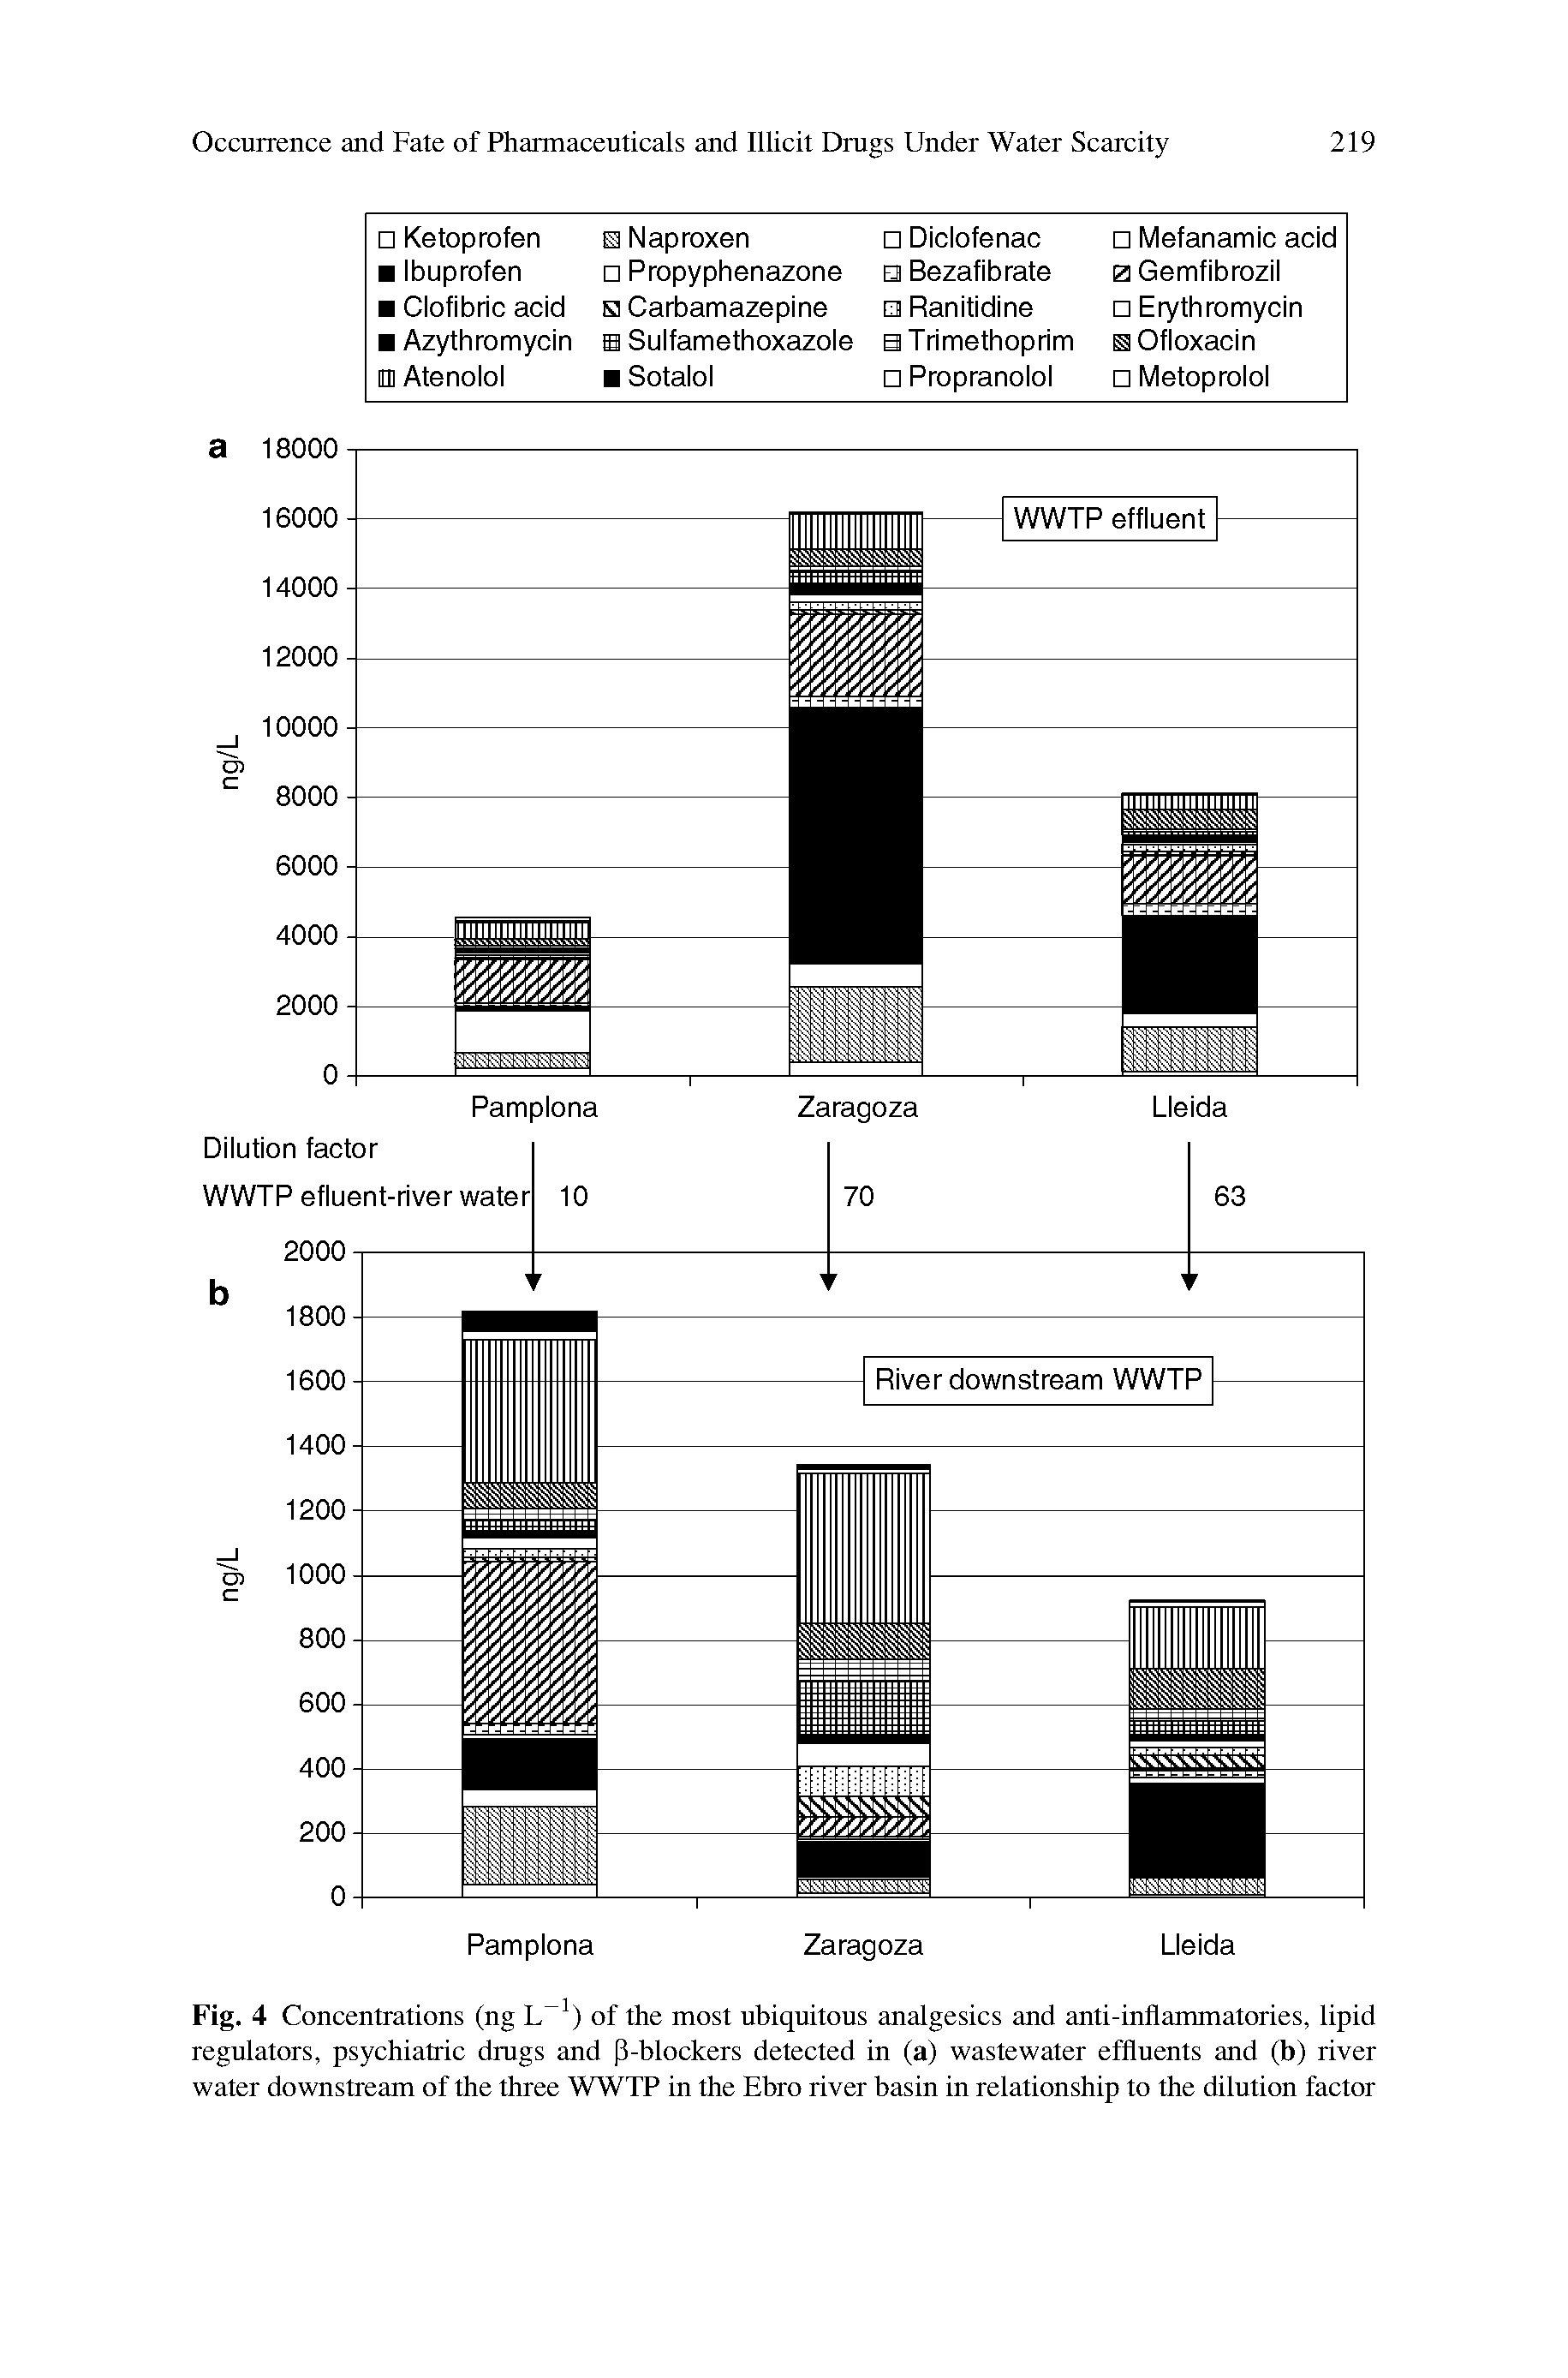 Fig. 4 Concentrations (ng L ) of the most ubiquitous analgesics and anti-inflammatories, lipid regulators, psychiatric drugs and [I-blockers detected in (a) wastewater effluents and (b) river water downstream of the three WWTP in the Ebro river basin in relationship to the dilution factor...